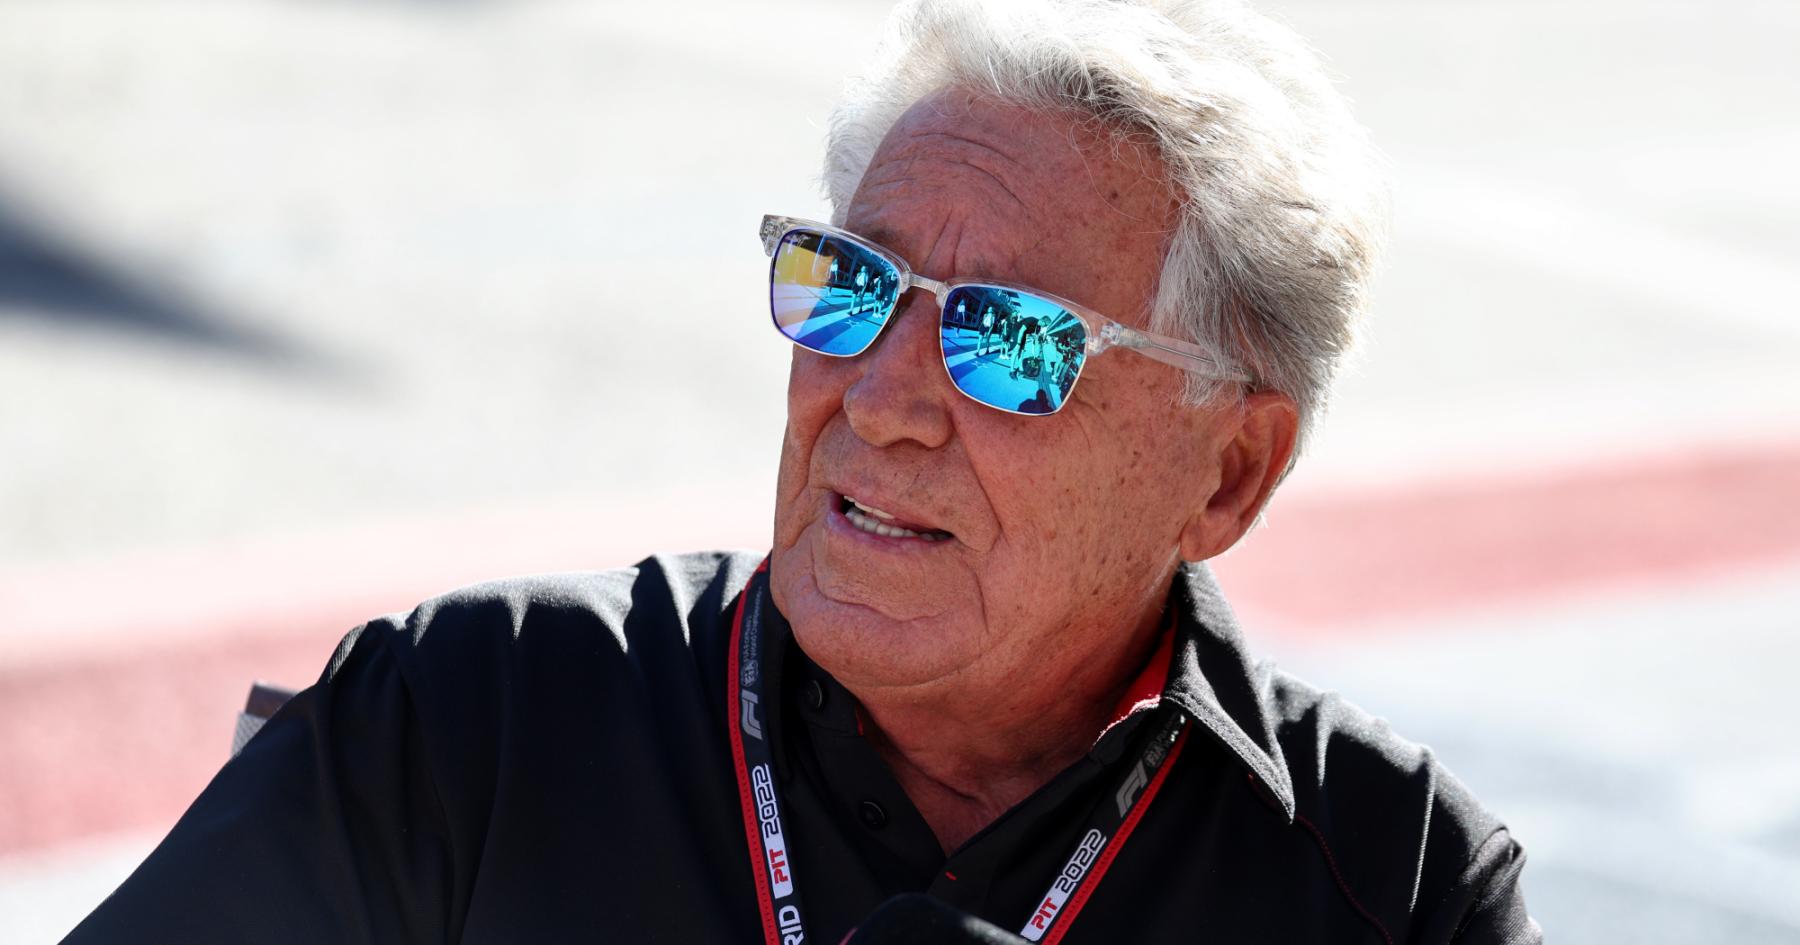 Andretti fires back at F1 amid team pursuit